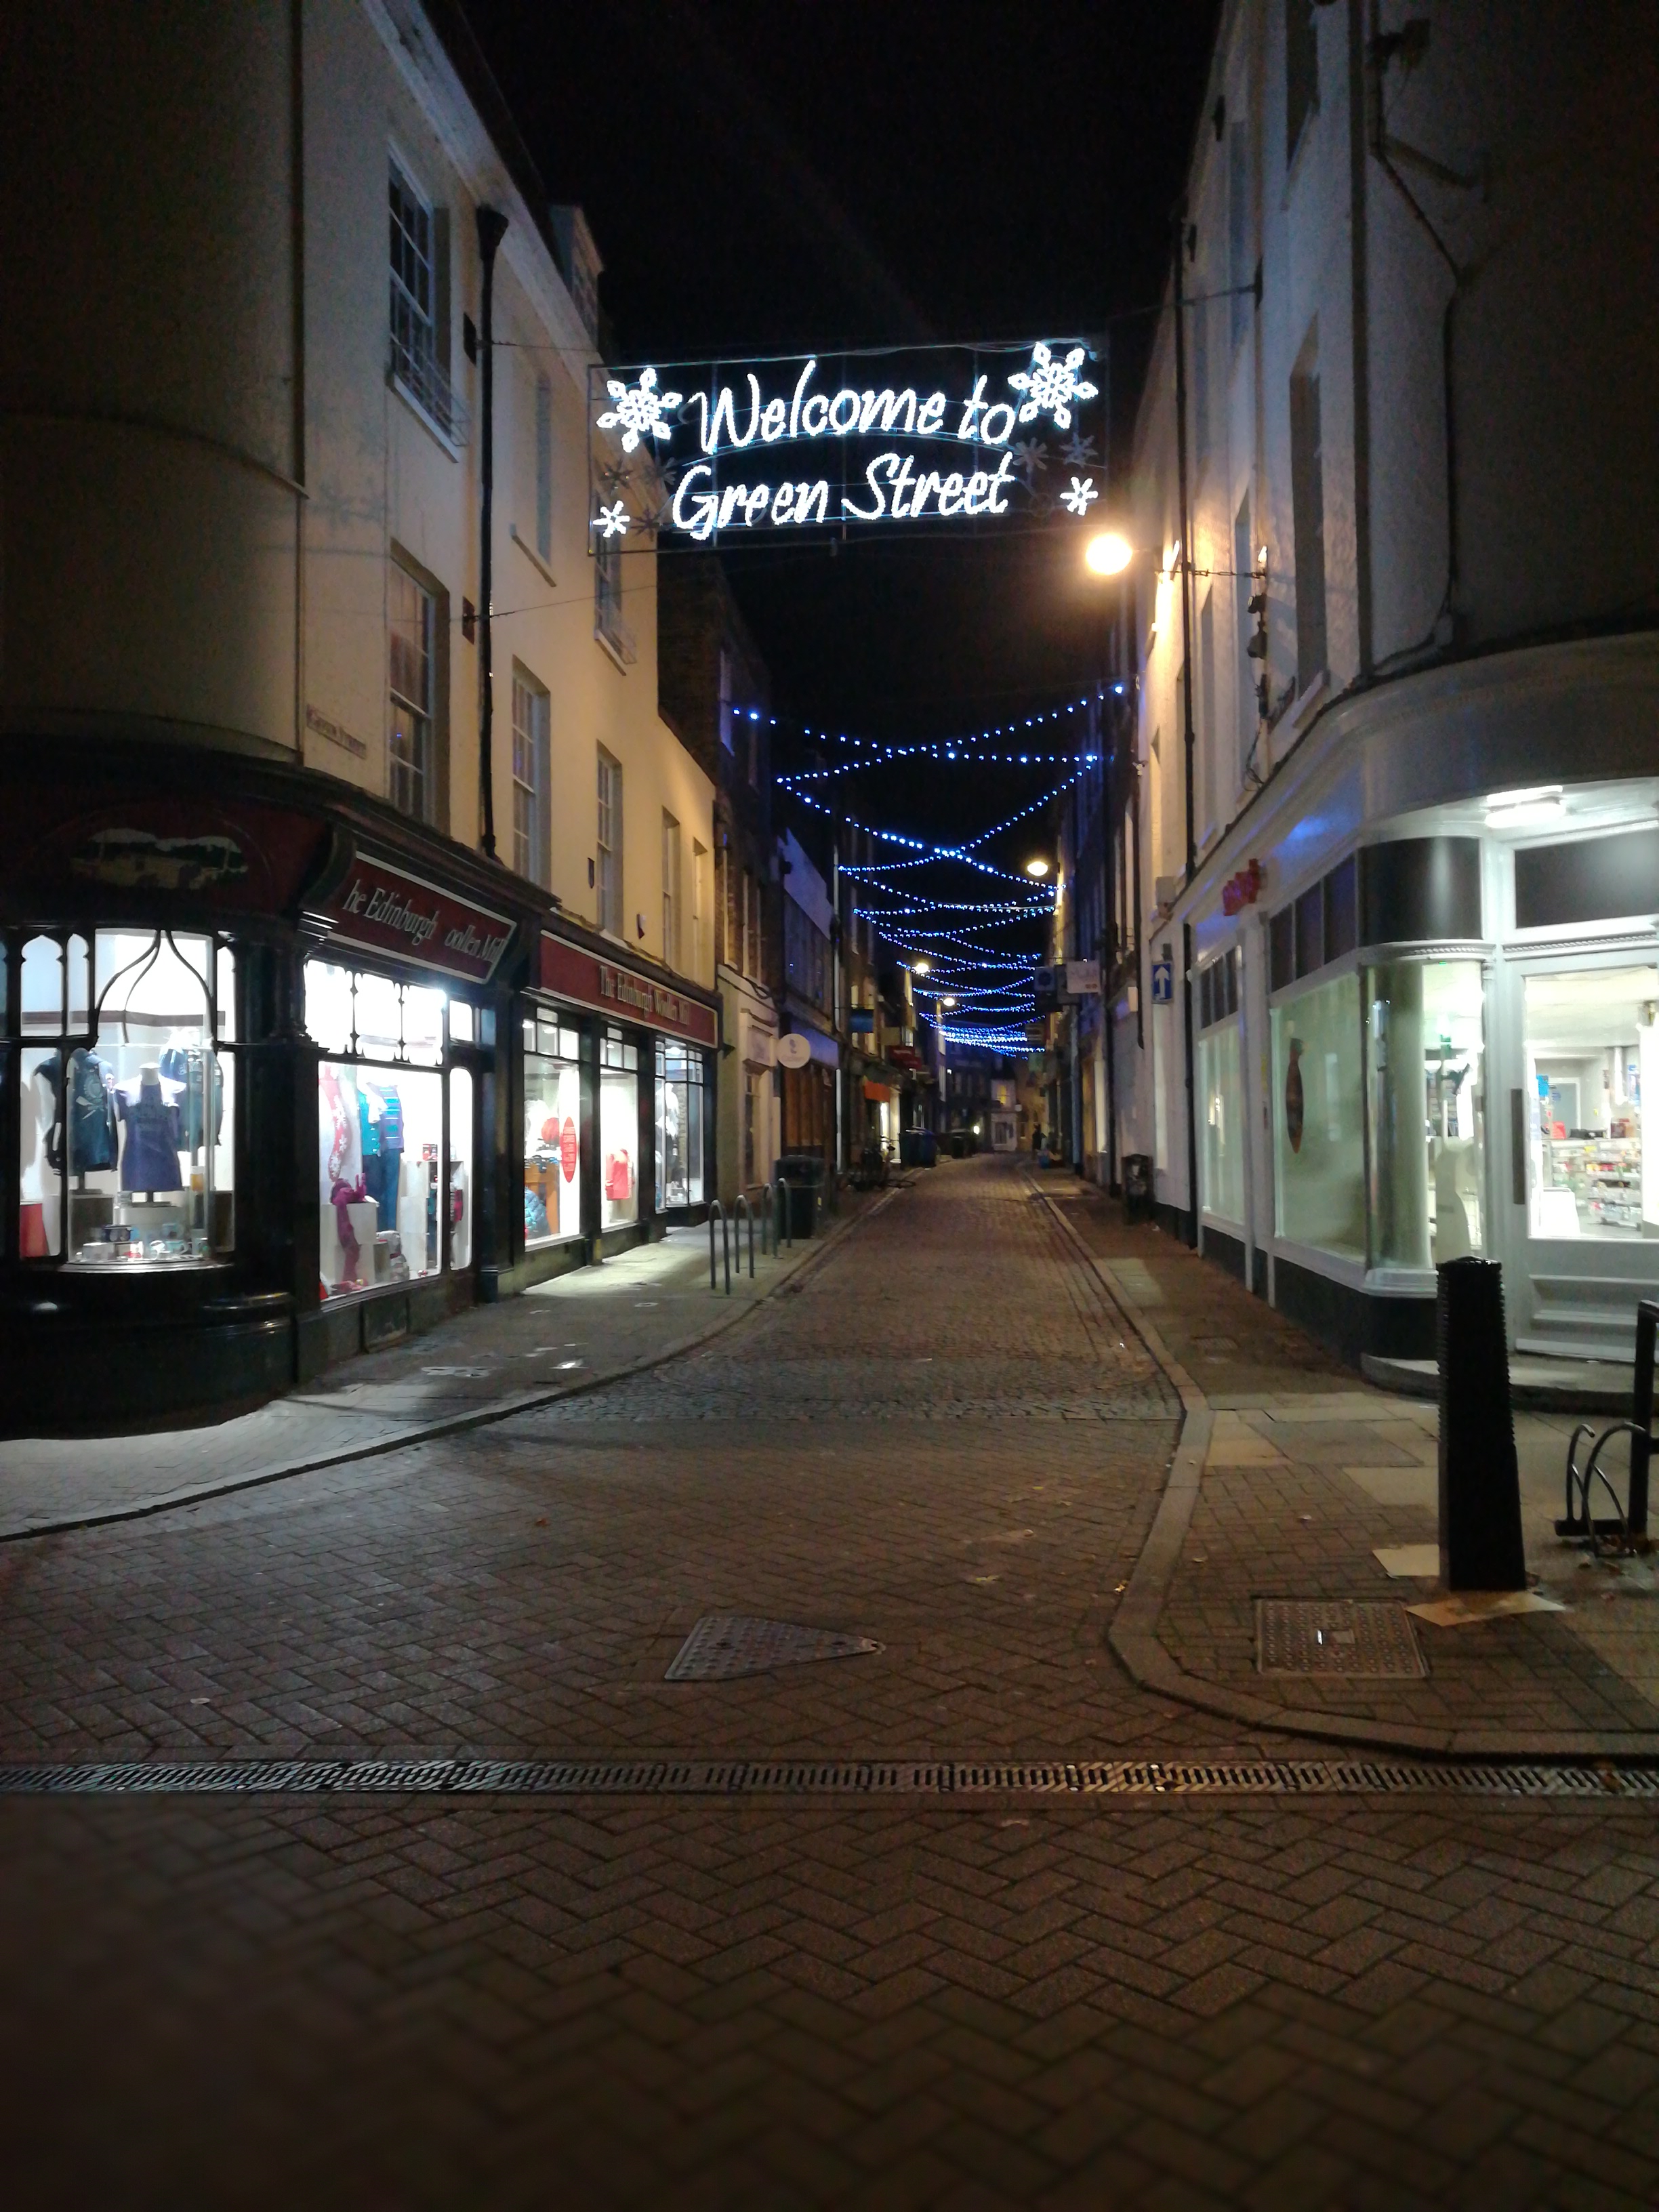 Lights spelling out "welcome to Green street", with shops either side.